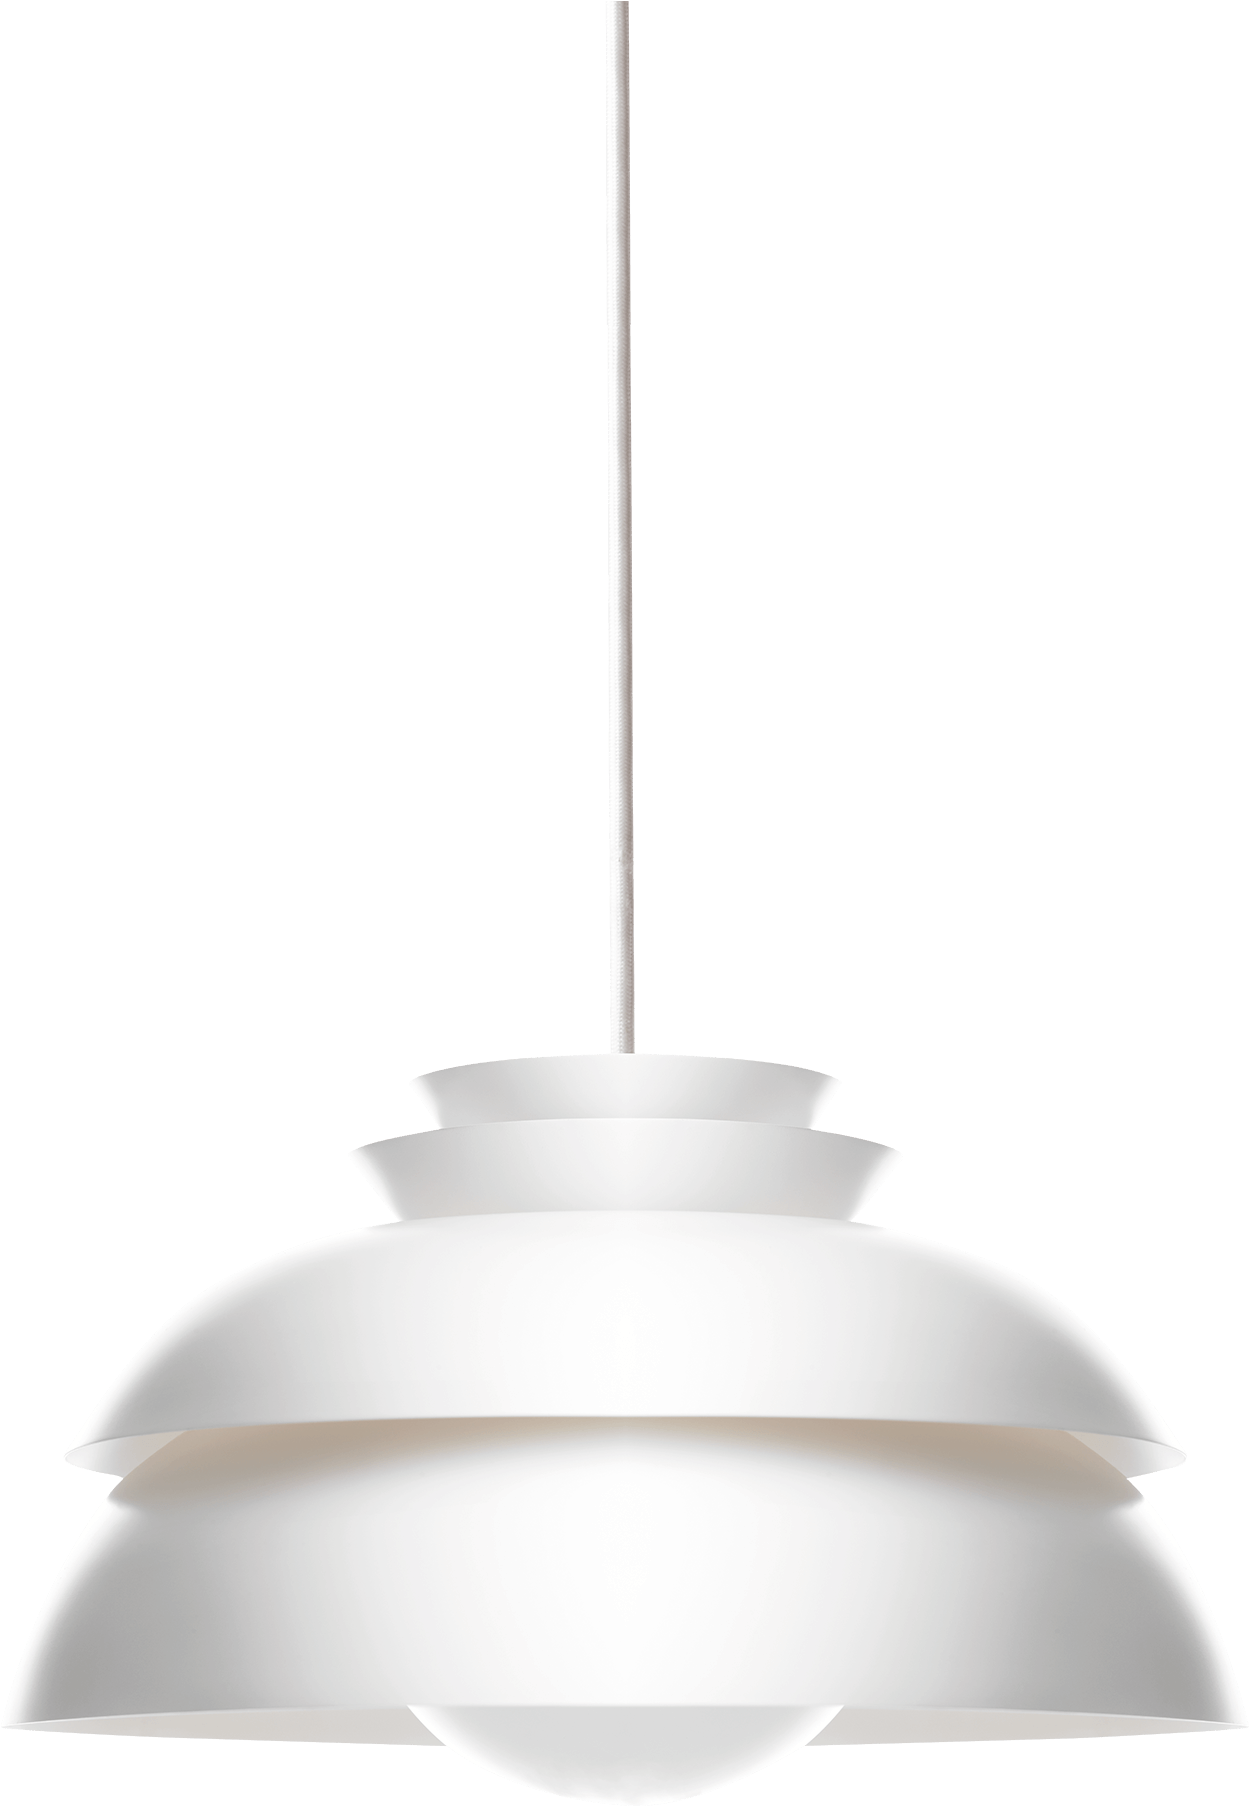 A White Light Fixture With A Black Background